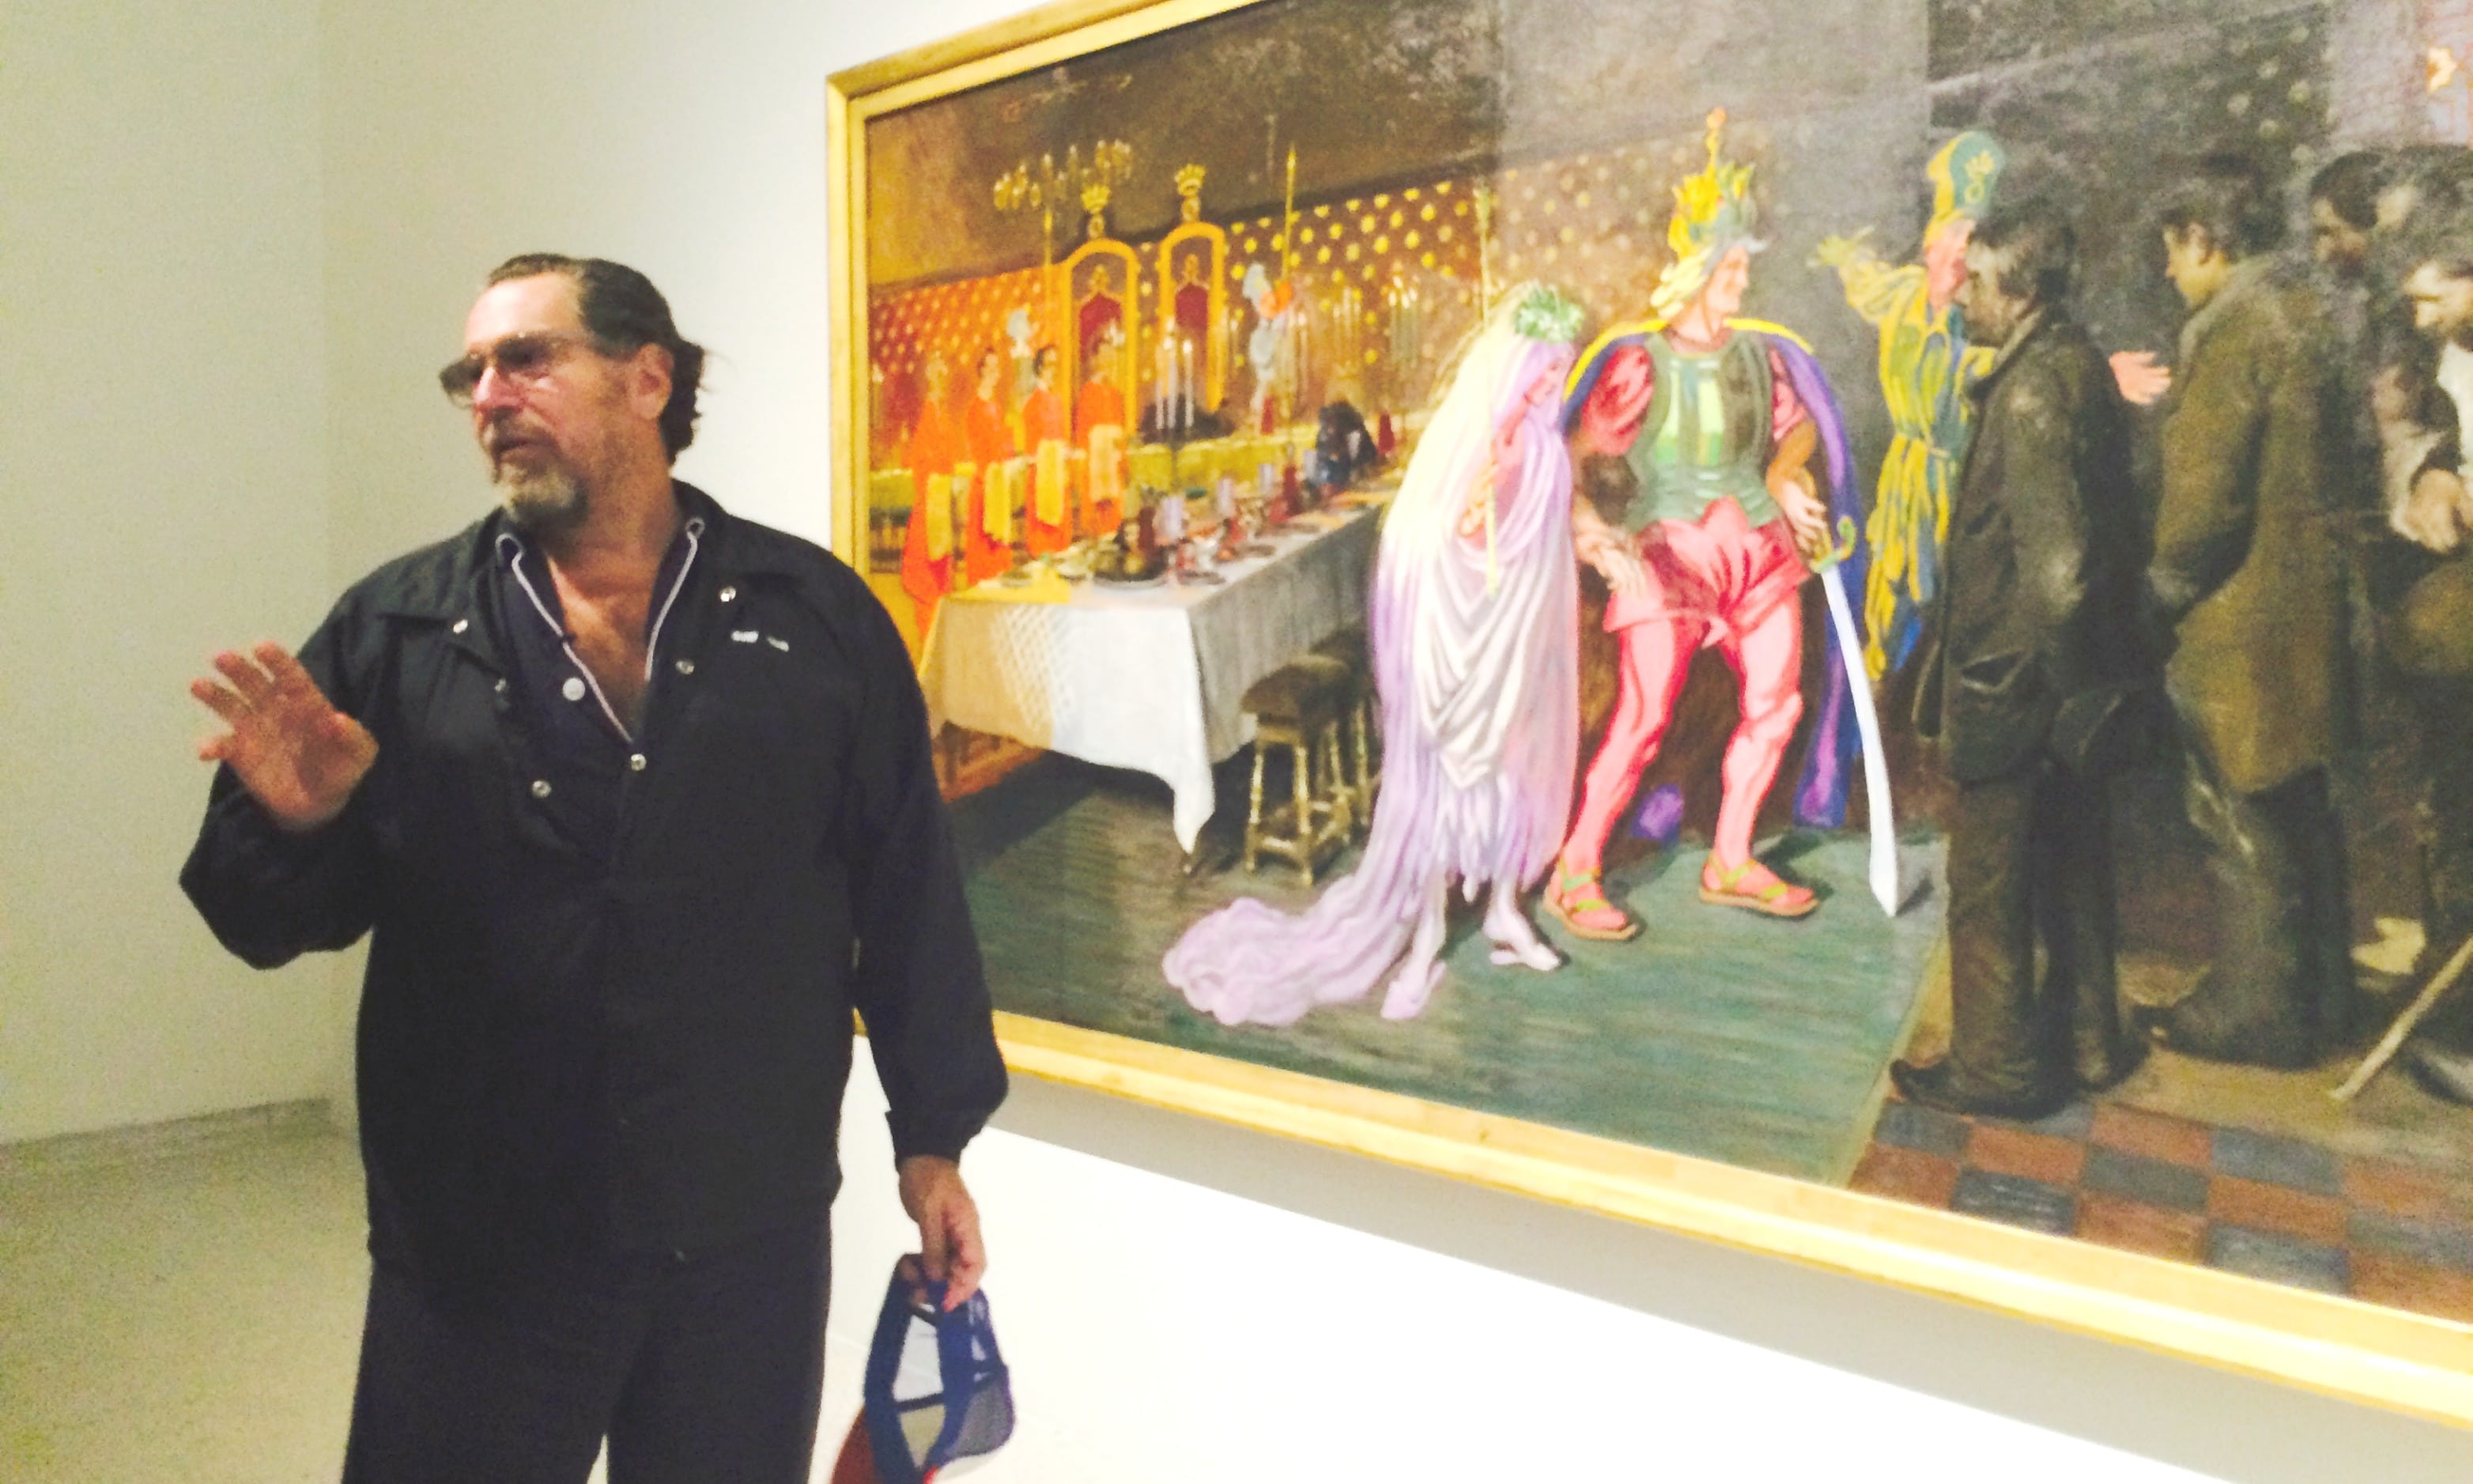 What I learned from spending the day with Julian Schnabel